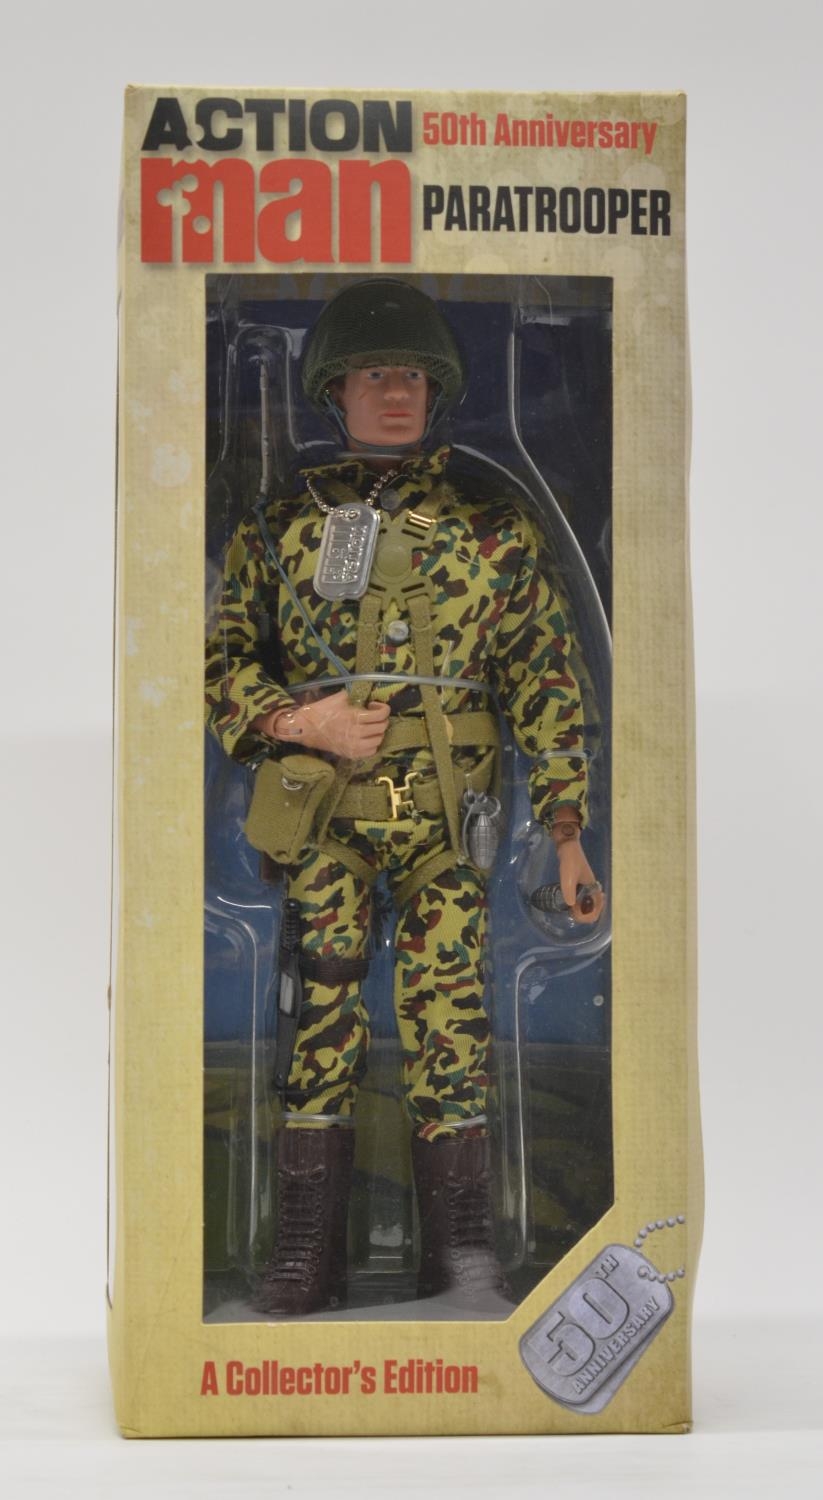 50th anniversary Action Man Paratrooper, Collector's Edition figure, contents as new and factory